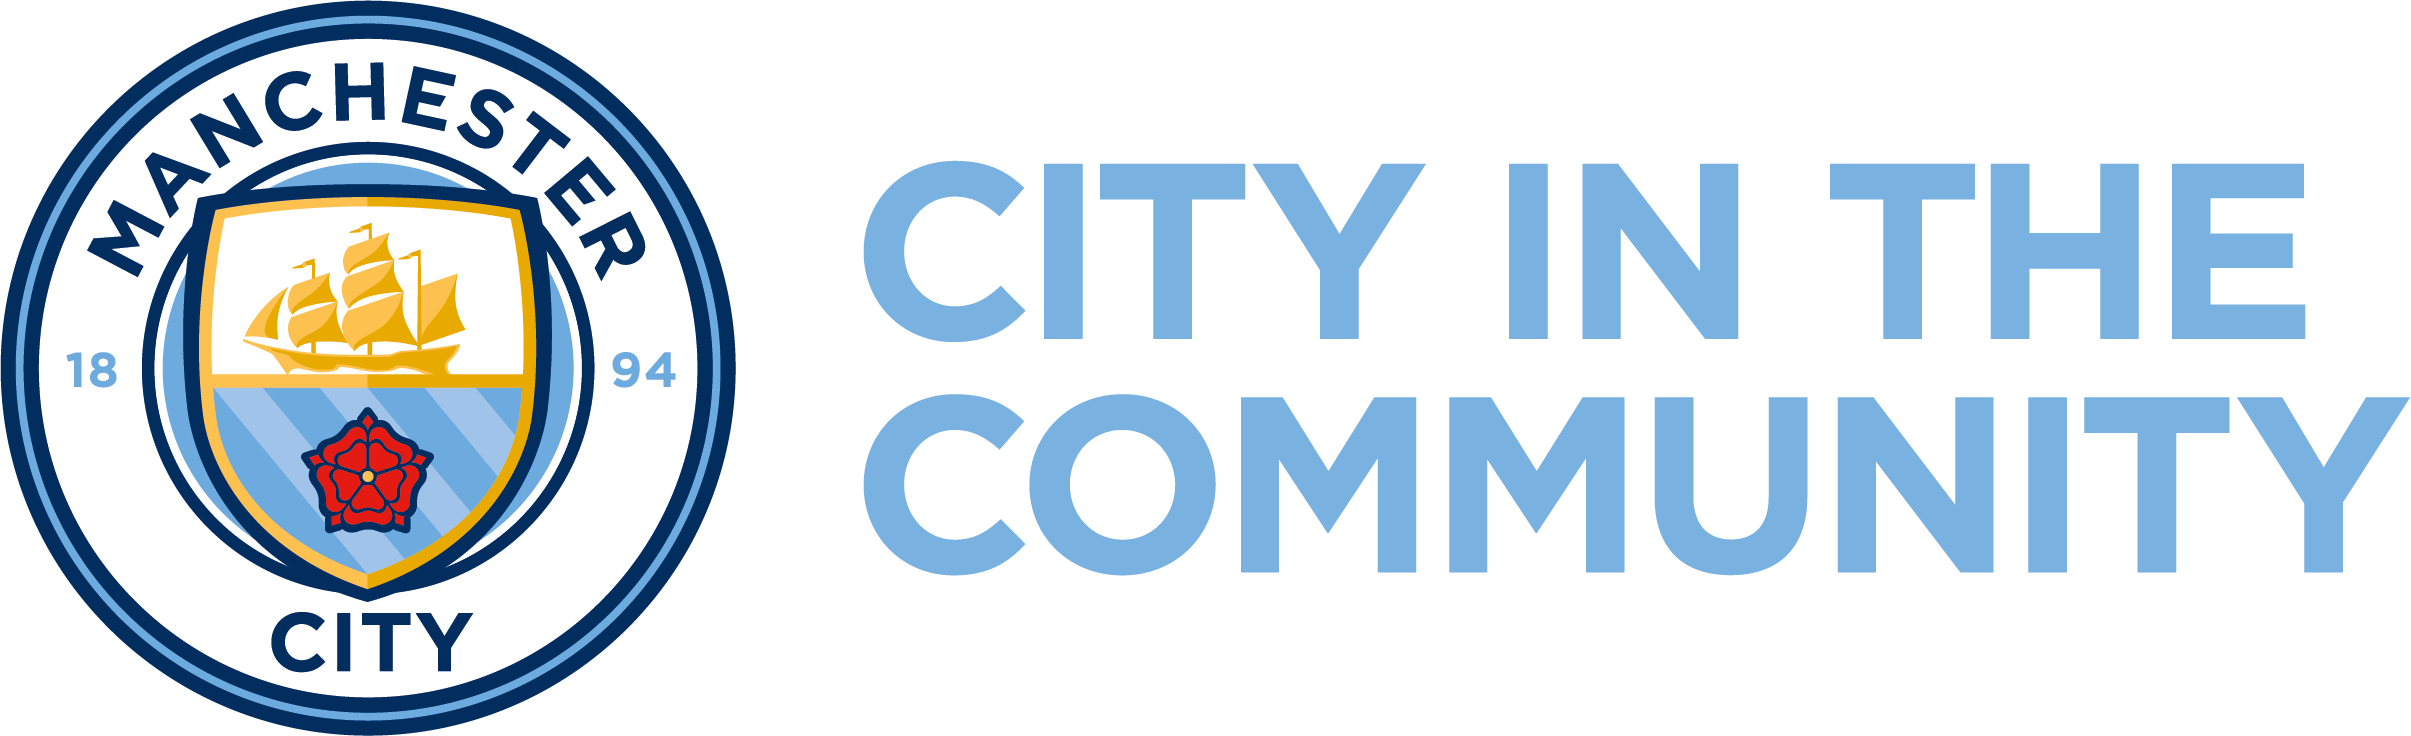 City in the Community: Soccer Schools